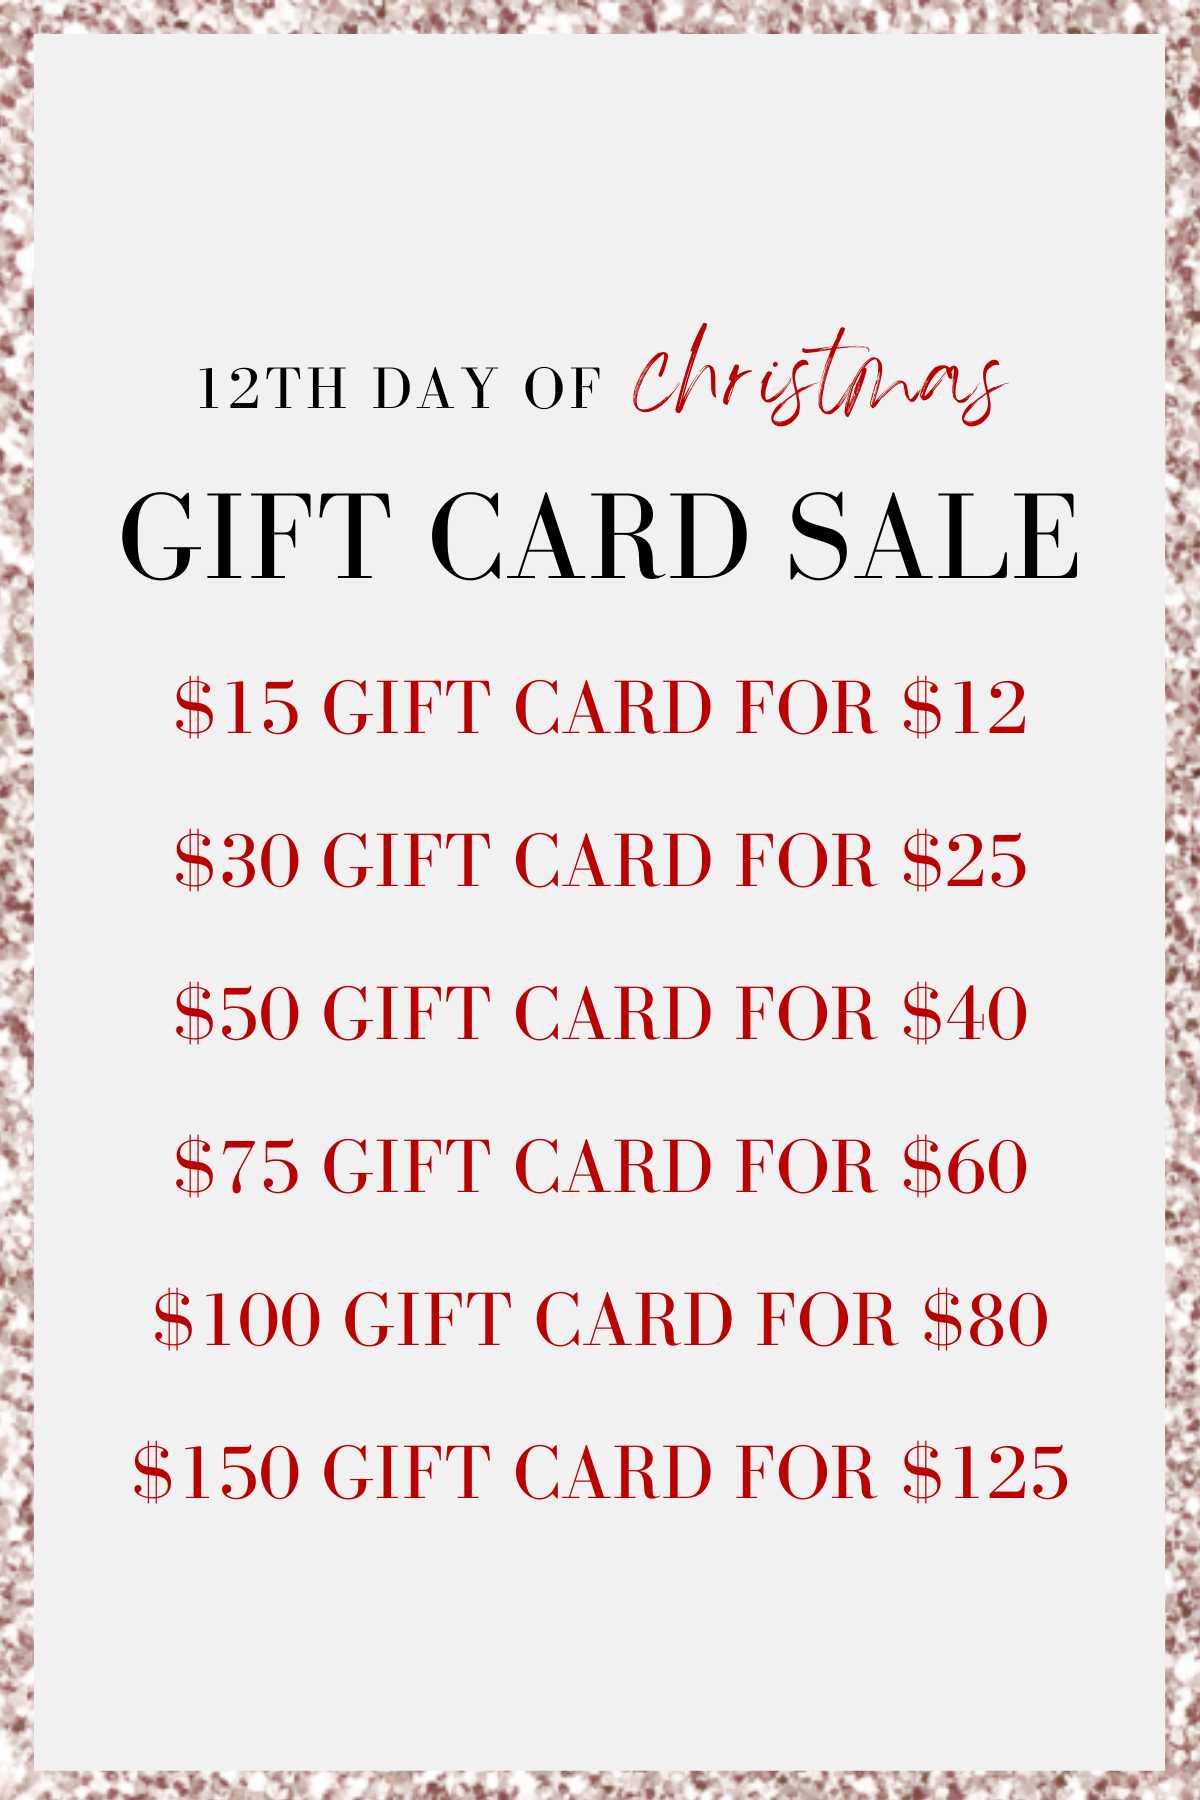 Gift Cards for sale